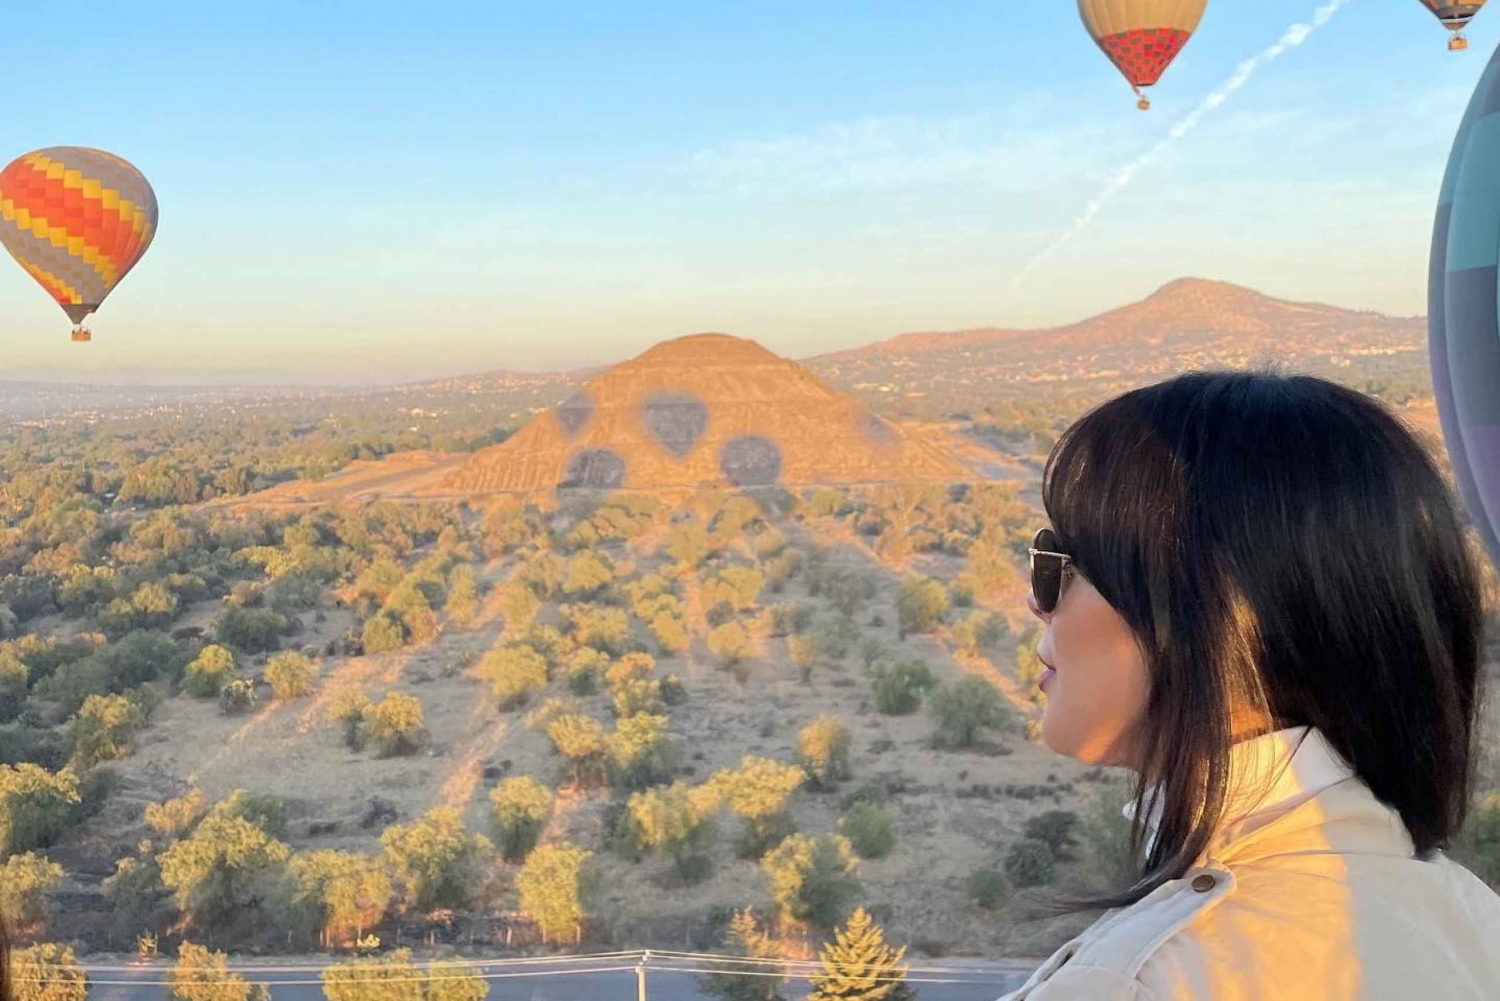 Hot Air Balloon Over Teotihuacán Valley